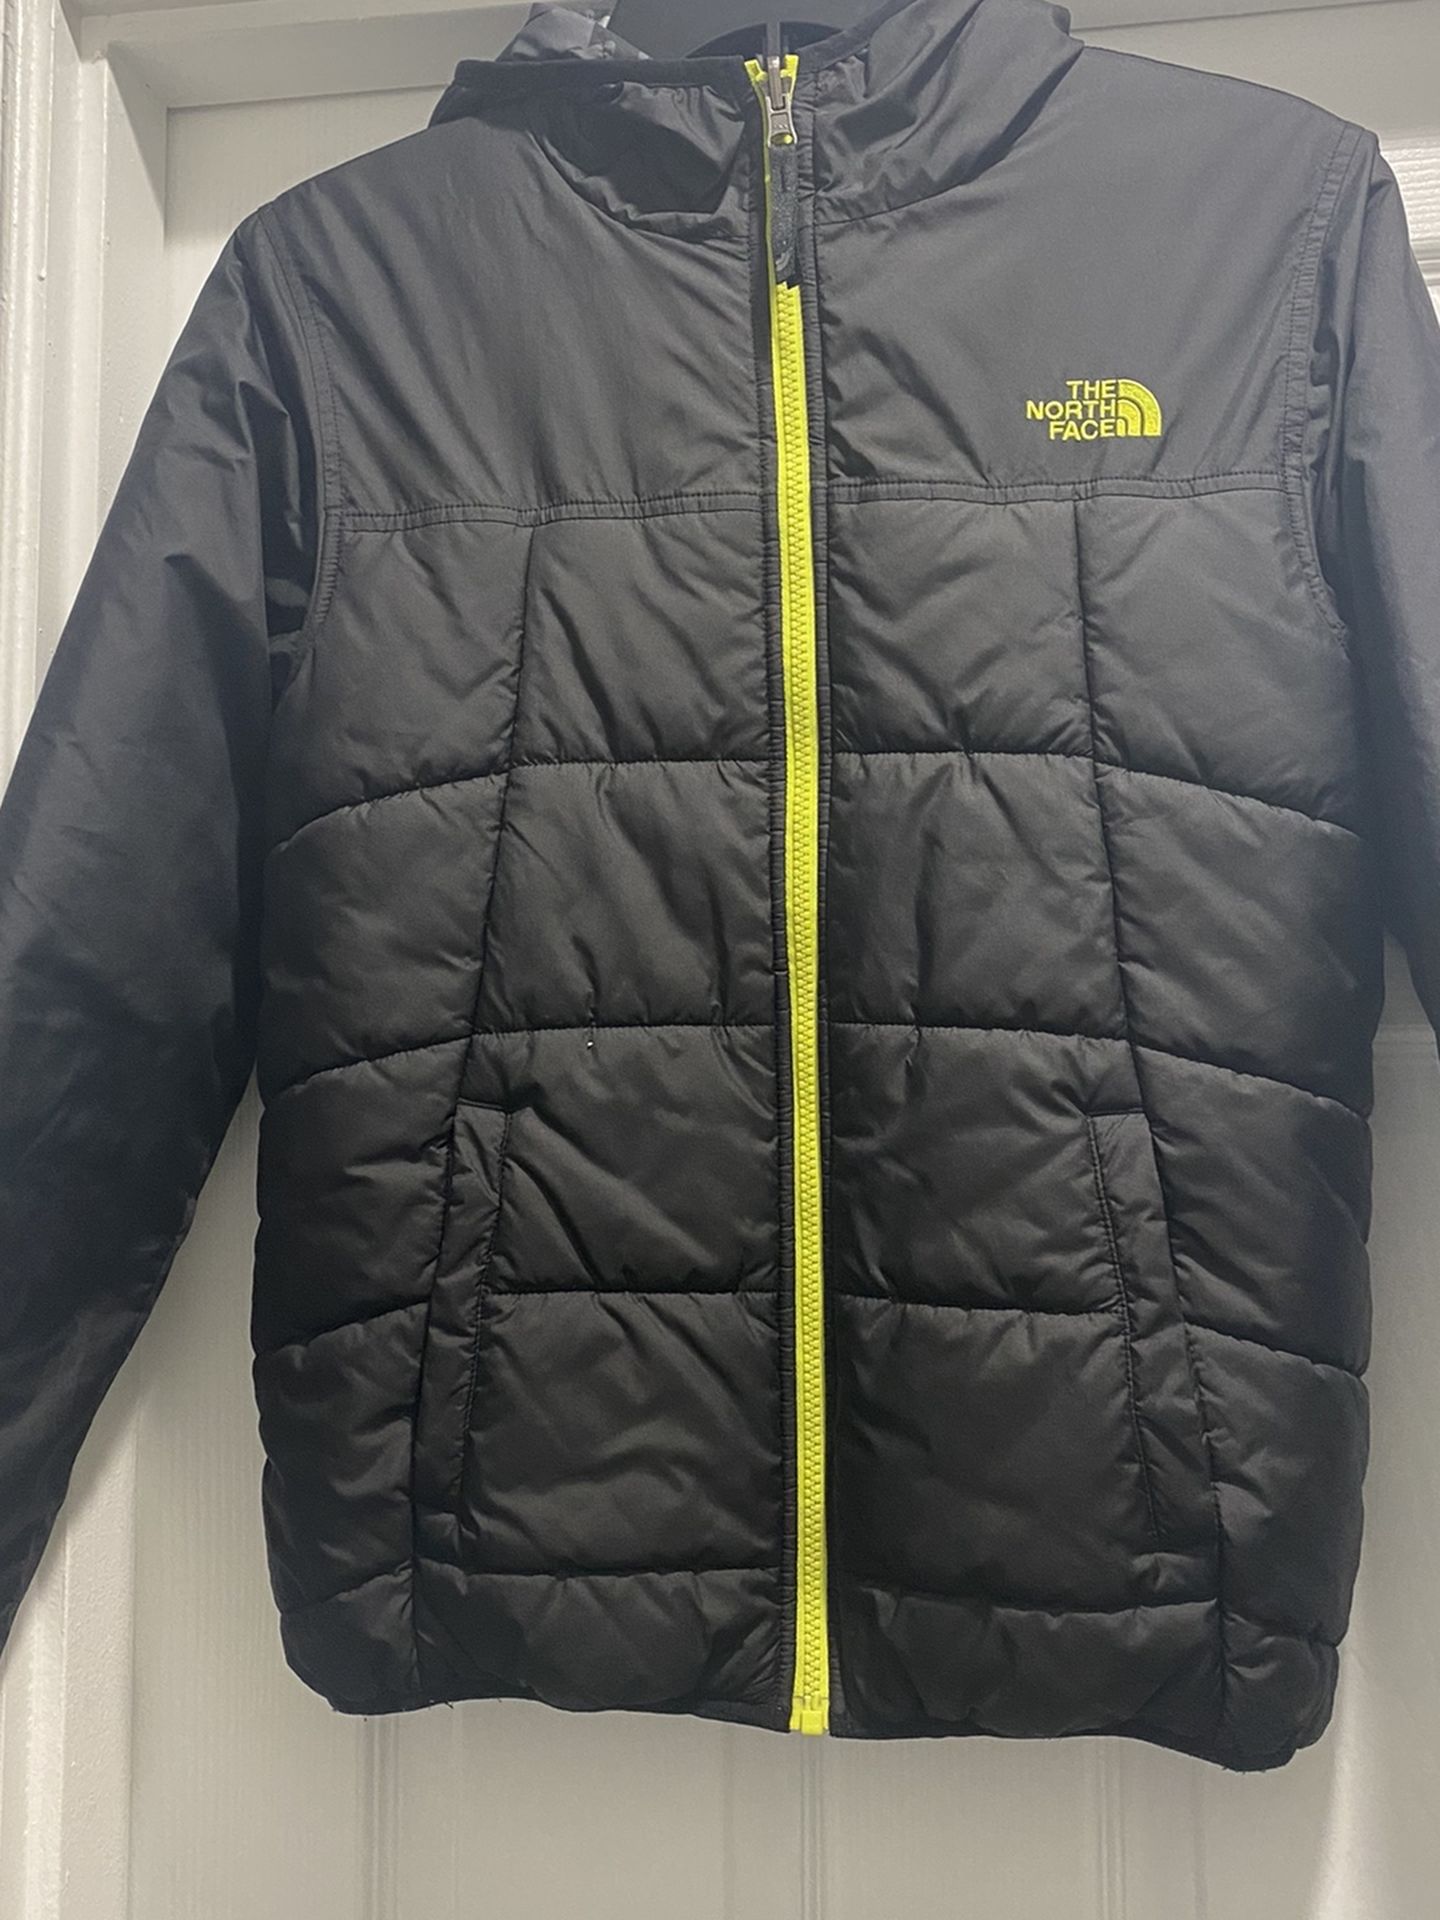 The North Face Youth Reversible Jacket